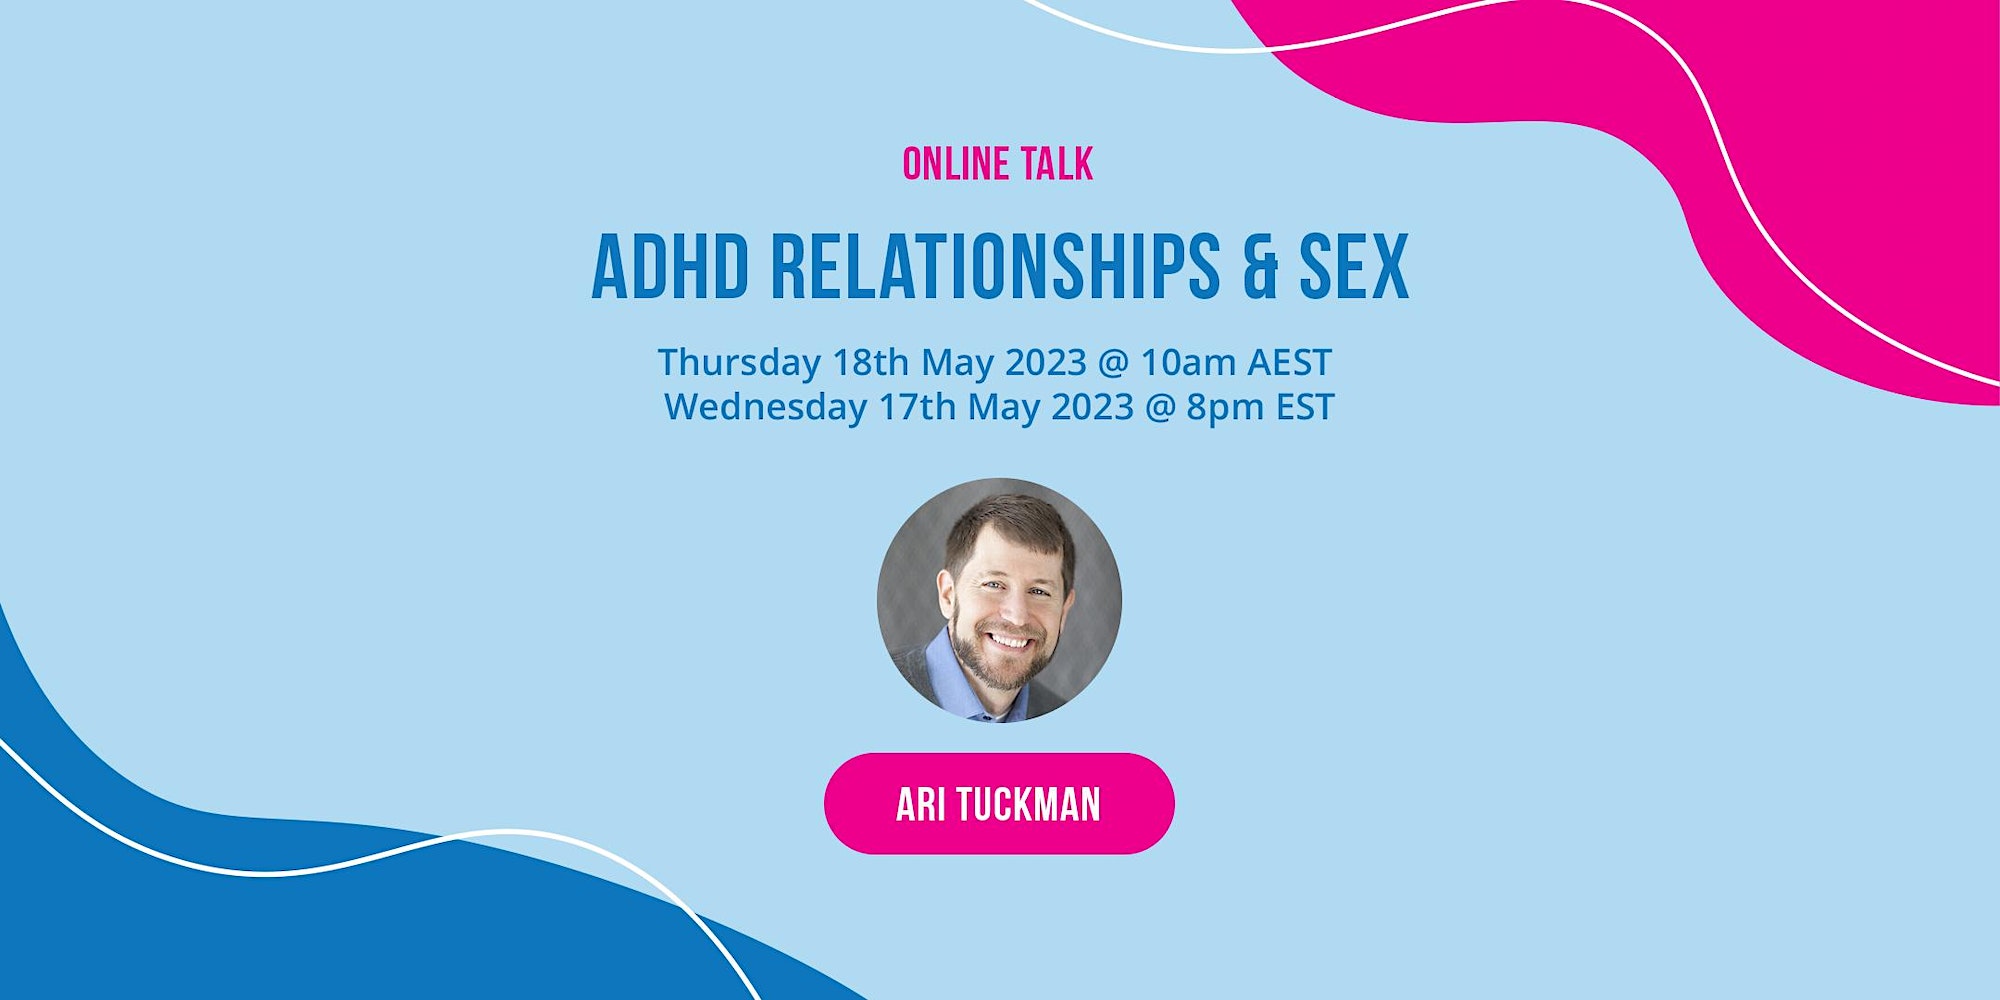 Online Talk ADHD Relationships & Sex May 18, 2023 Thursday 10AM AEST, May 17, 2023 Wednesday 8PM EST